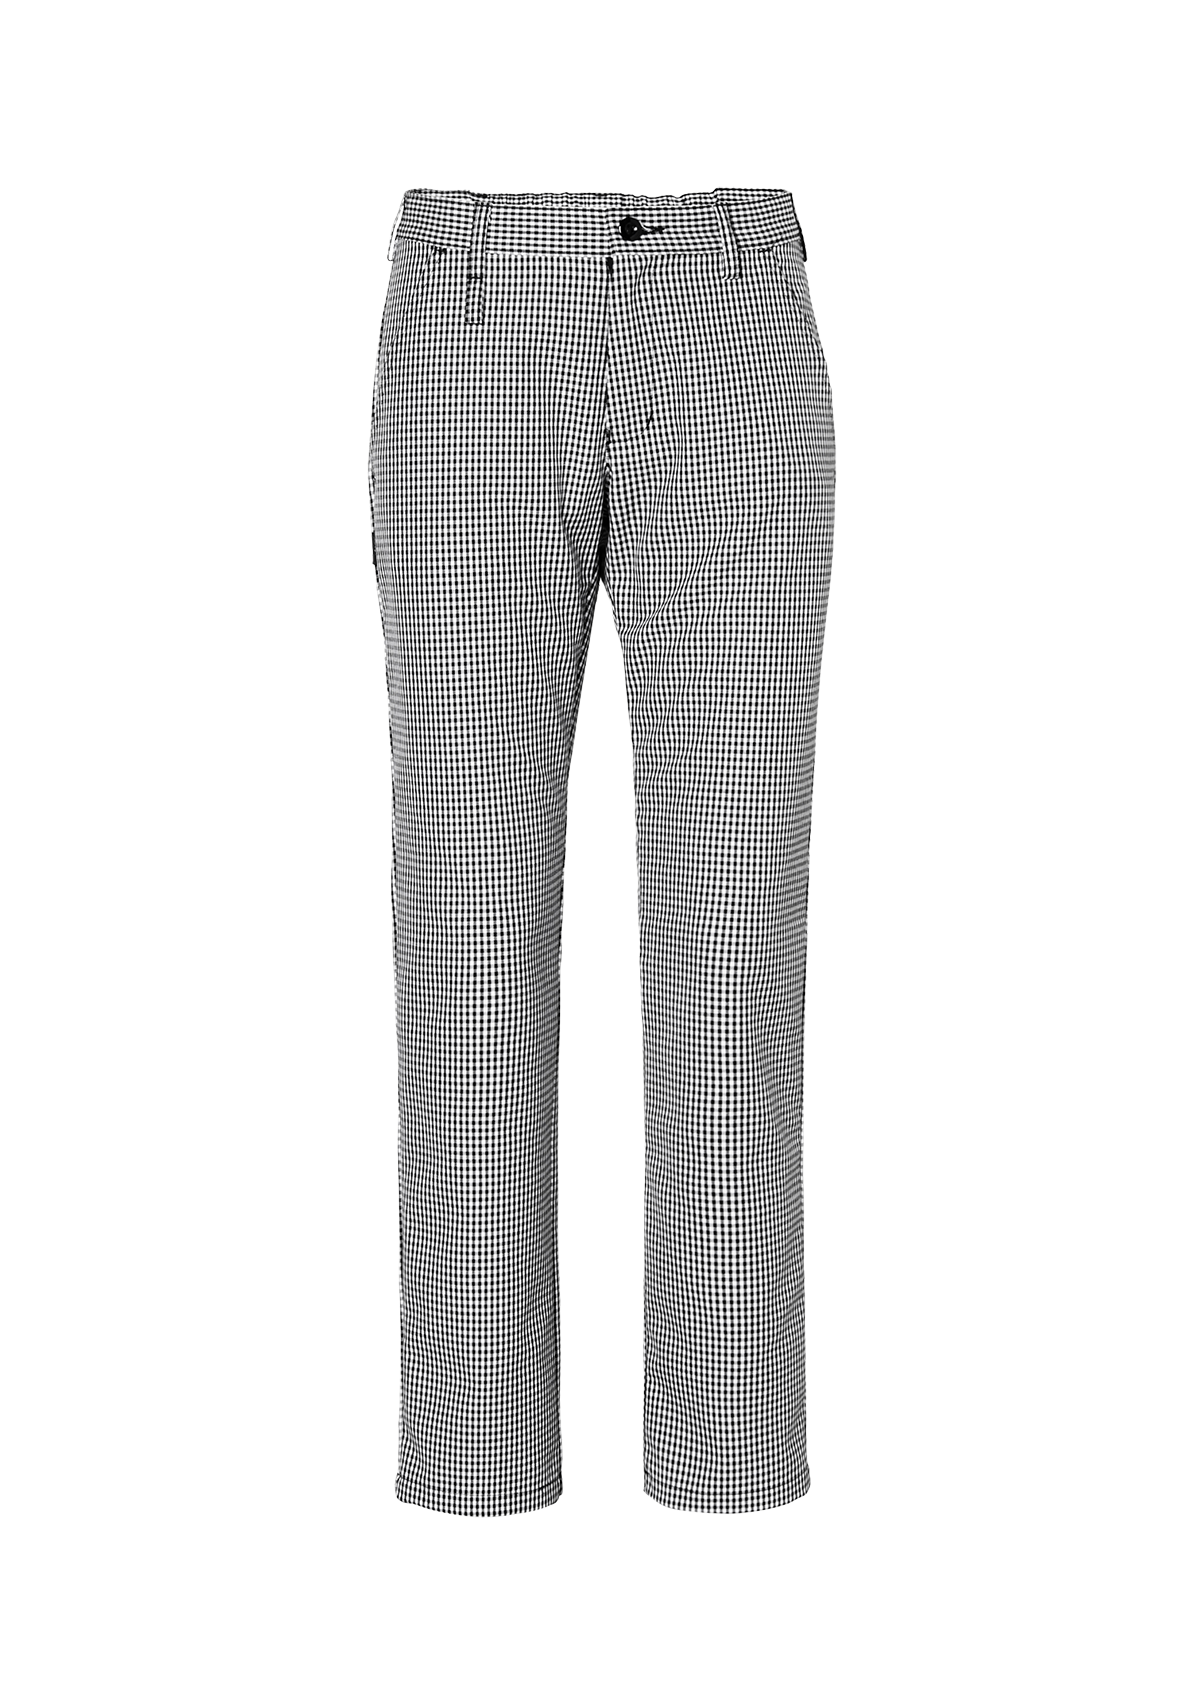 Women's Chef trousers in black pepita with smooth front. Segers | Cookniche